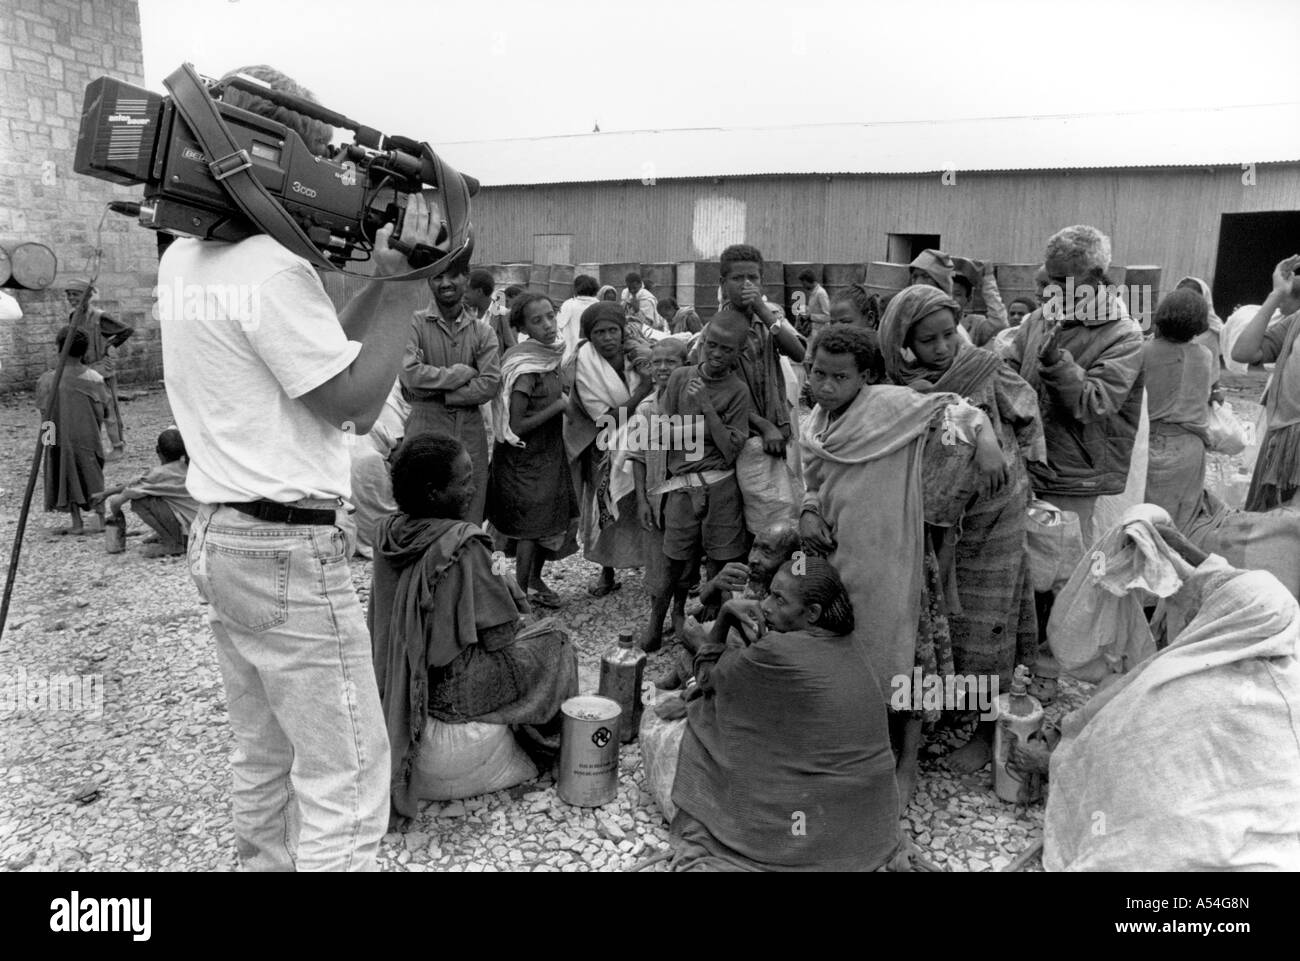 Painet hq1439 black and white media film team making movie famine catholic relief services food distribution center mekele Stock Photo